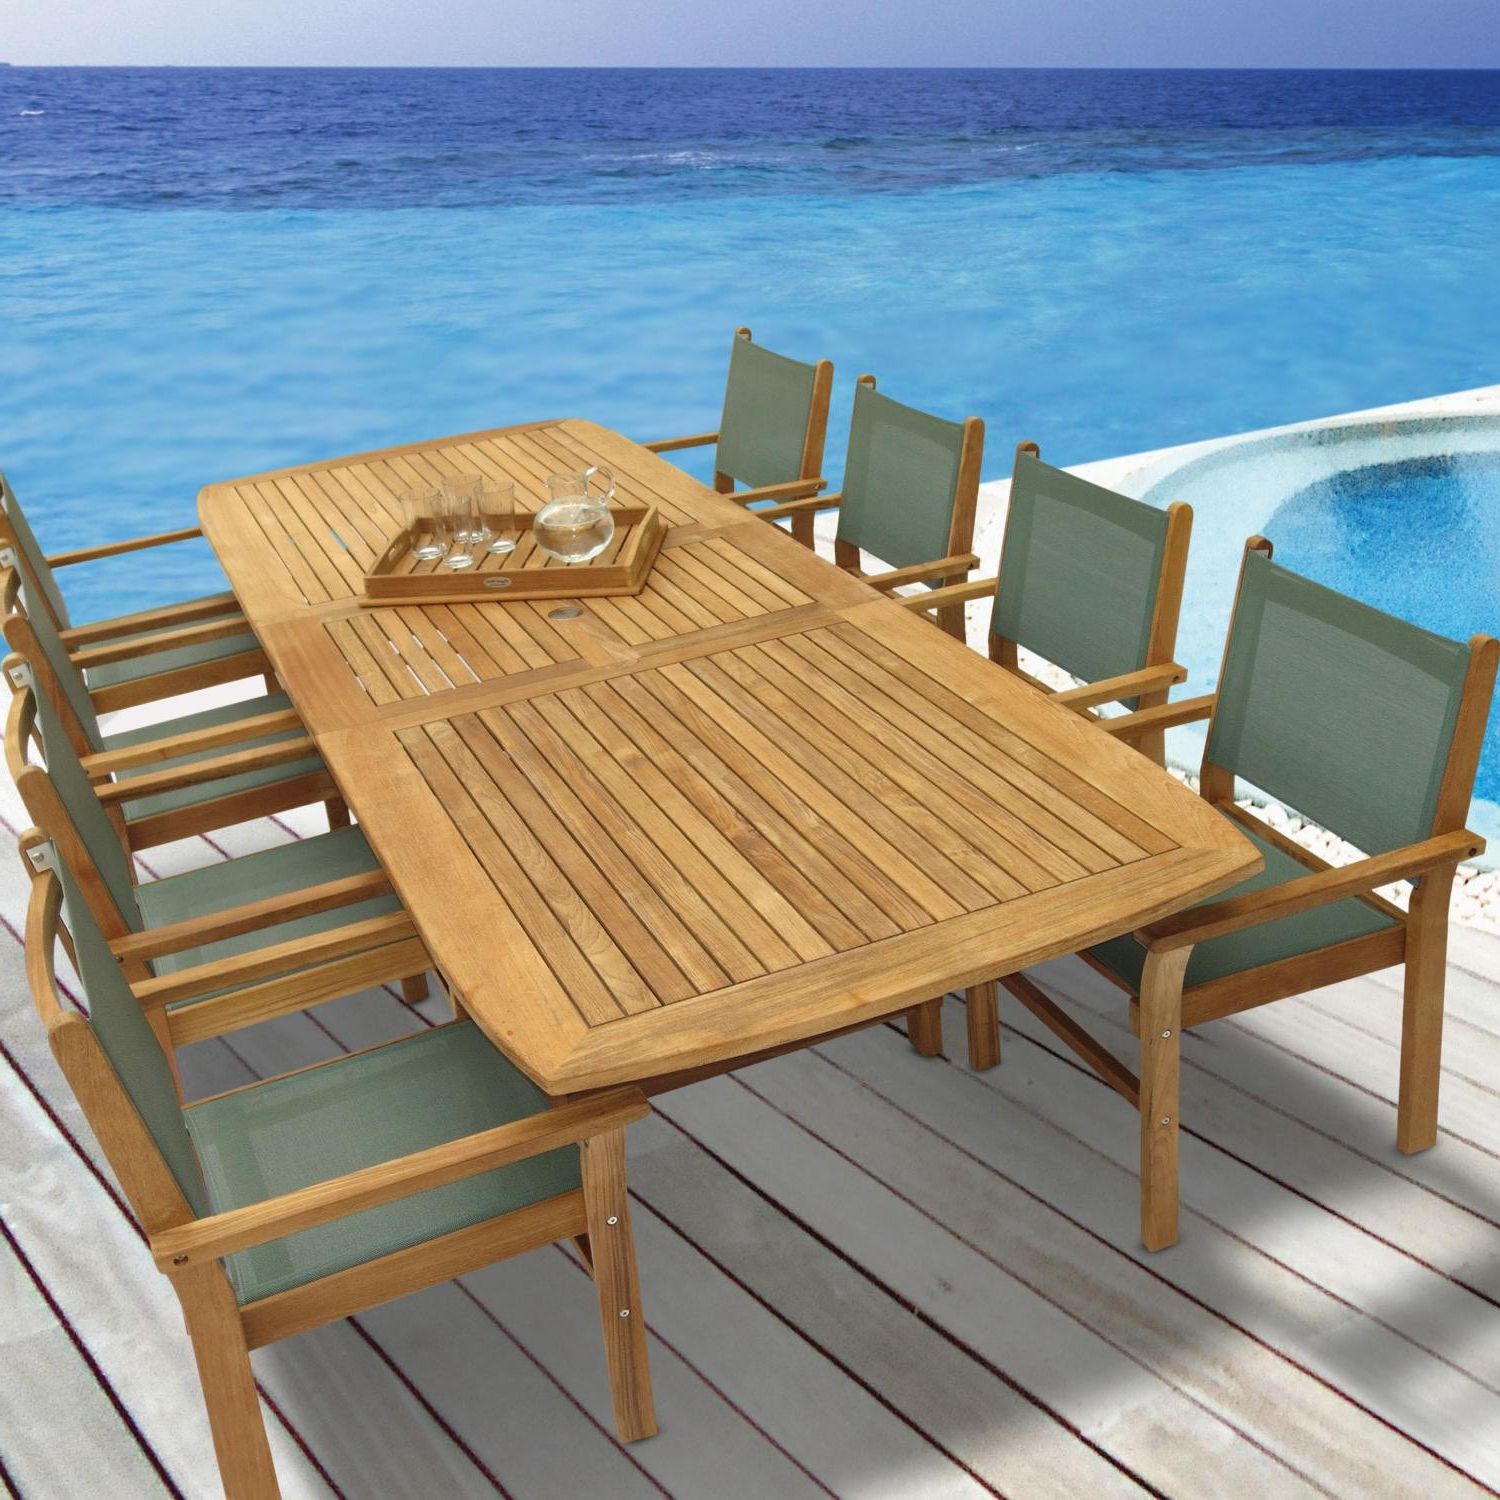 9 Piece Teak Outdoor Dining Sets Throughout Fashionable Captiva 9 Piece Teak Patio Dining Set W/ 96 X 44 Inch Rectangular (View 12 of 15)